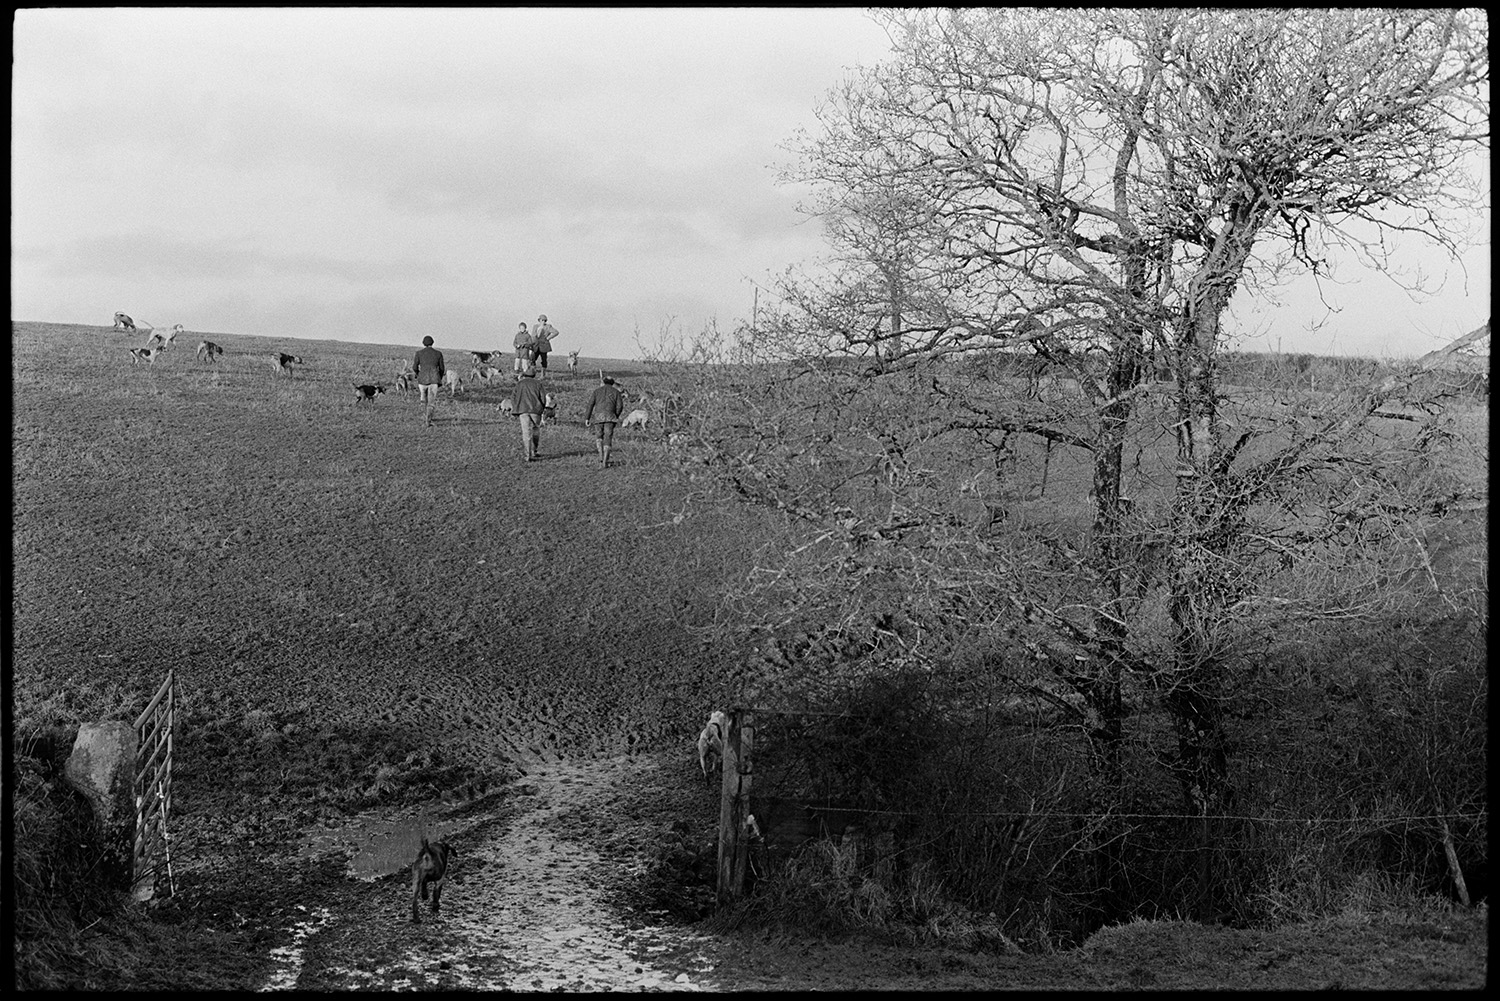 Men following hounds on a hunt across a field near Riddlecombe. A hound is walking through the muddy entrance to a field in the foreground.